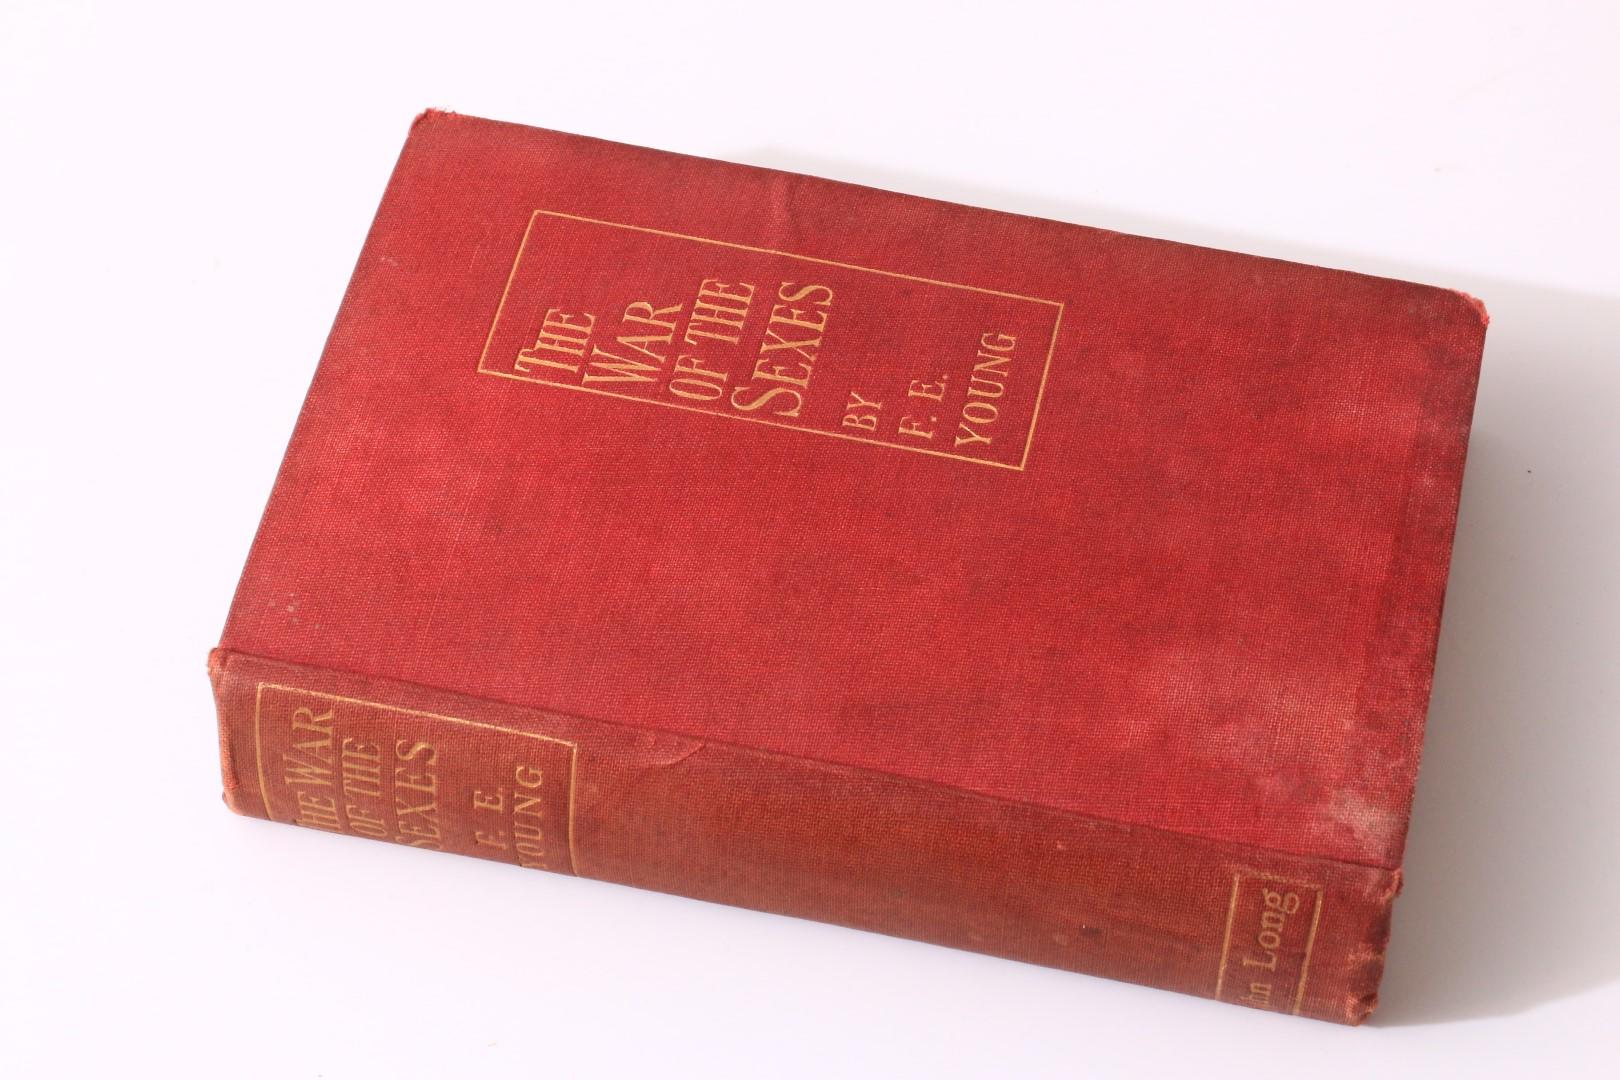 F.E. Young - The War of the Sexes - John Long, 1905, First Edition.